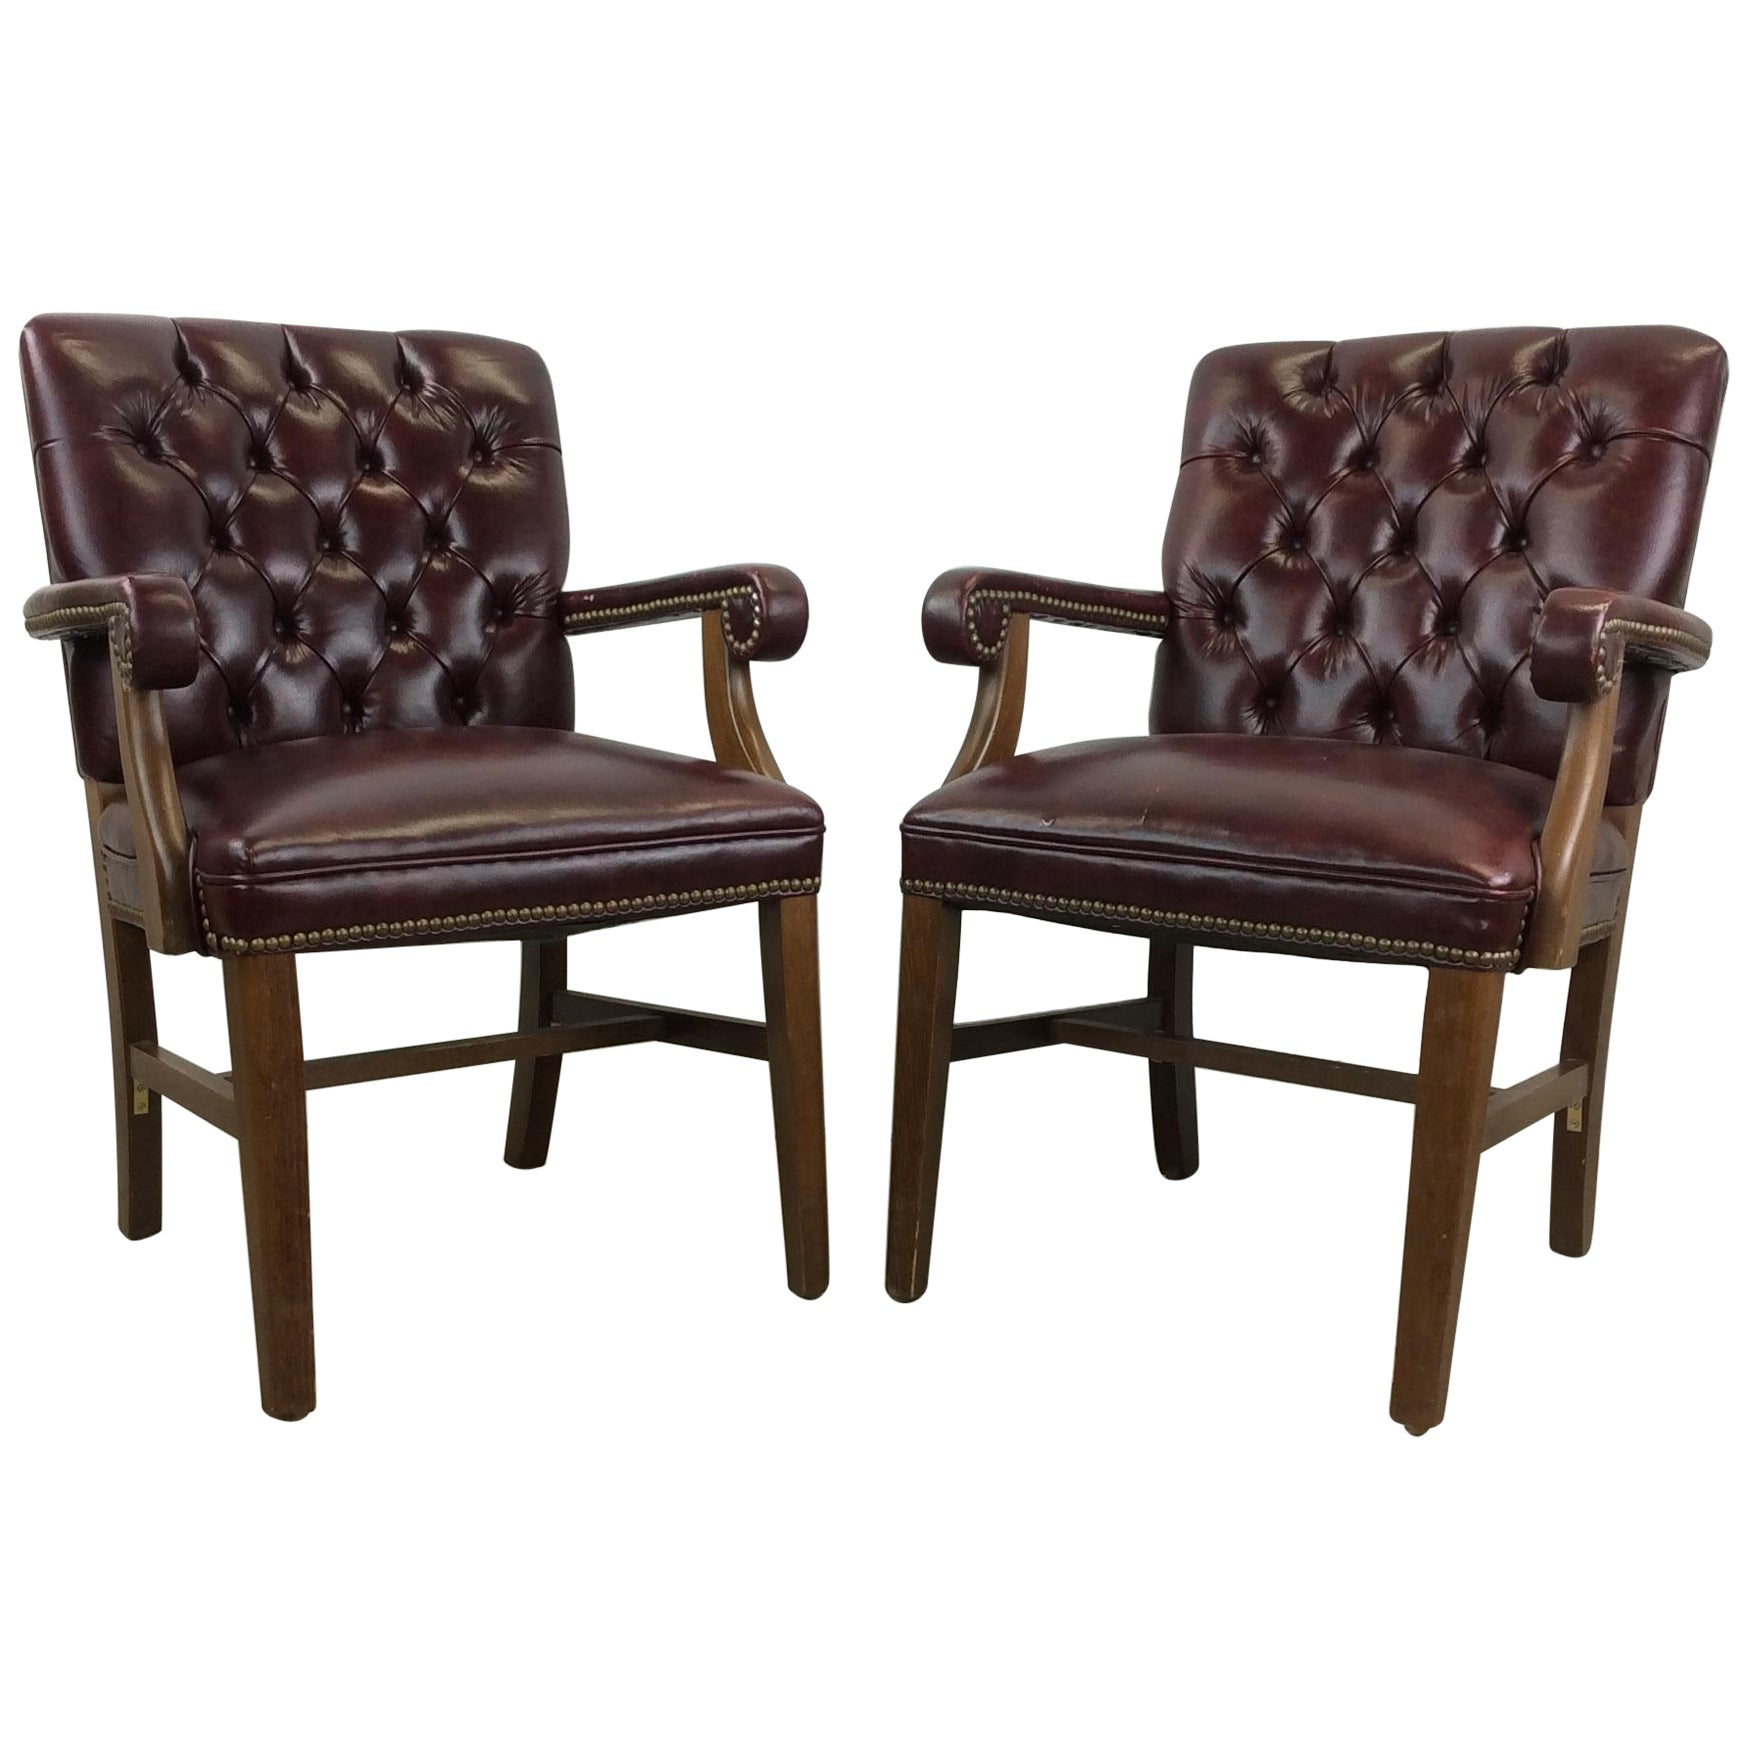 Pair of Vintage Red Tufted Leather Arm Chairs For Sale